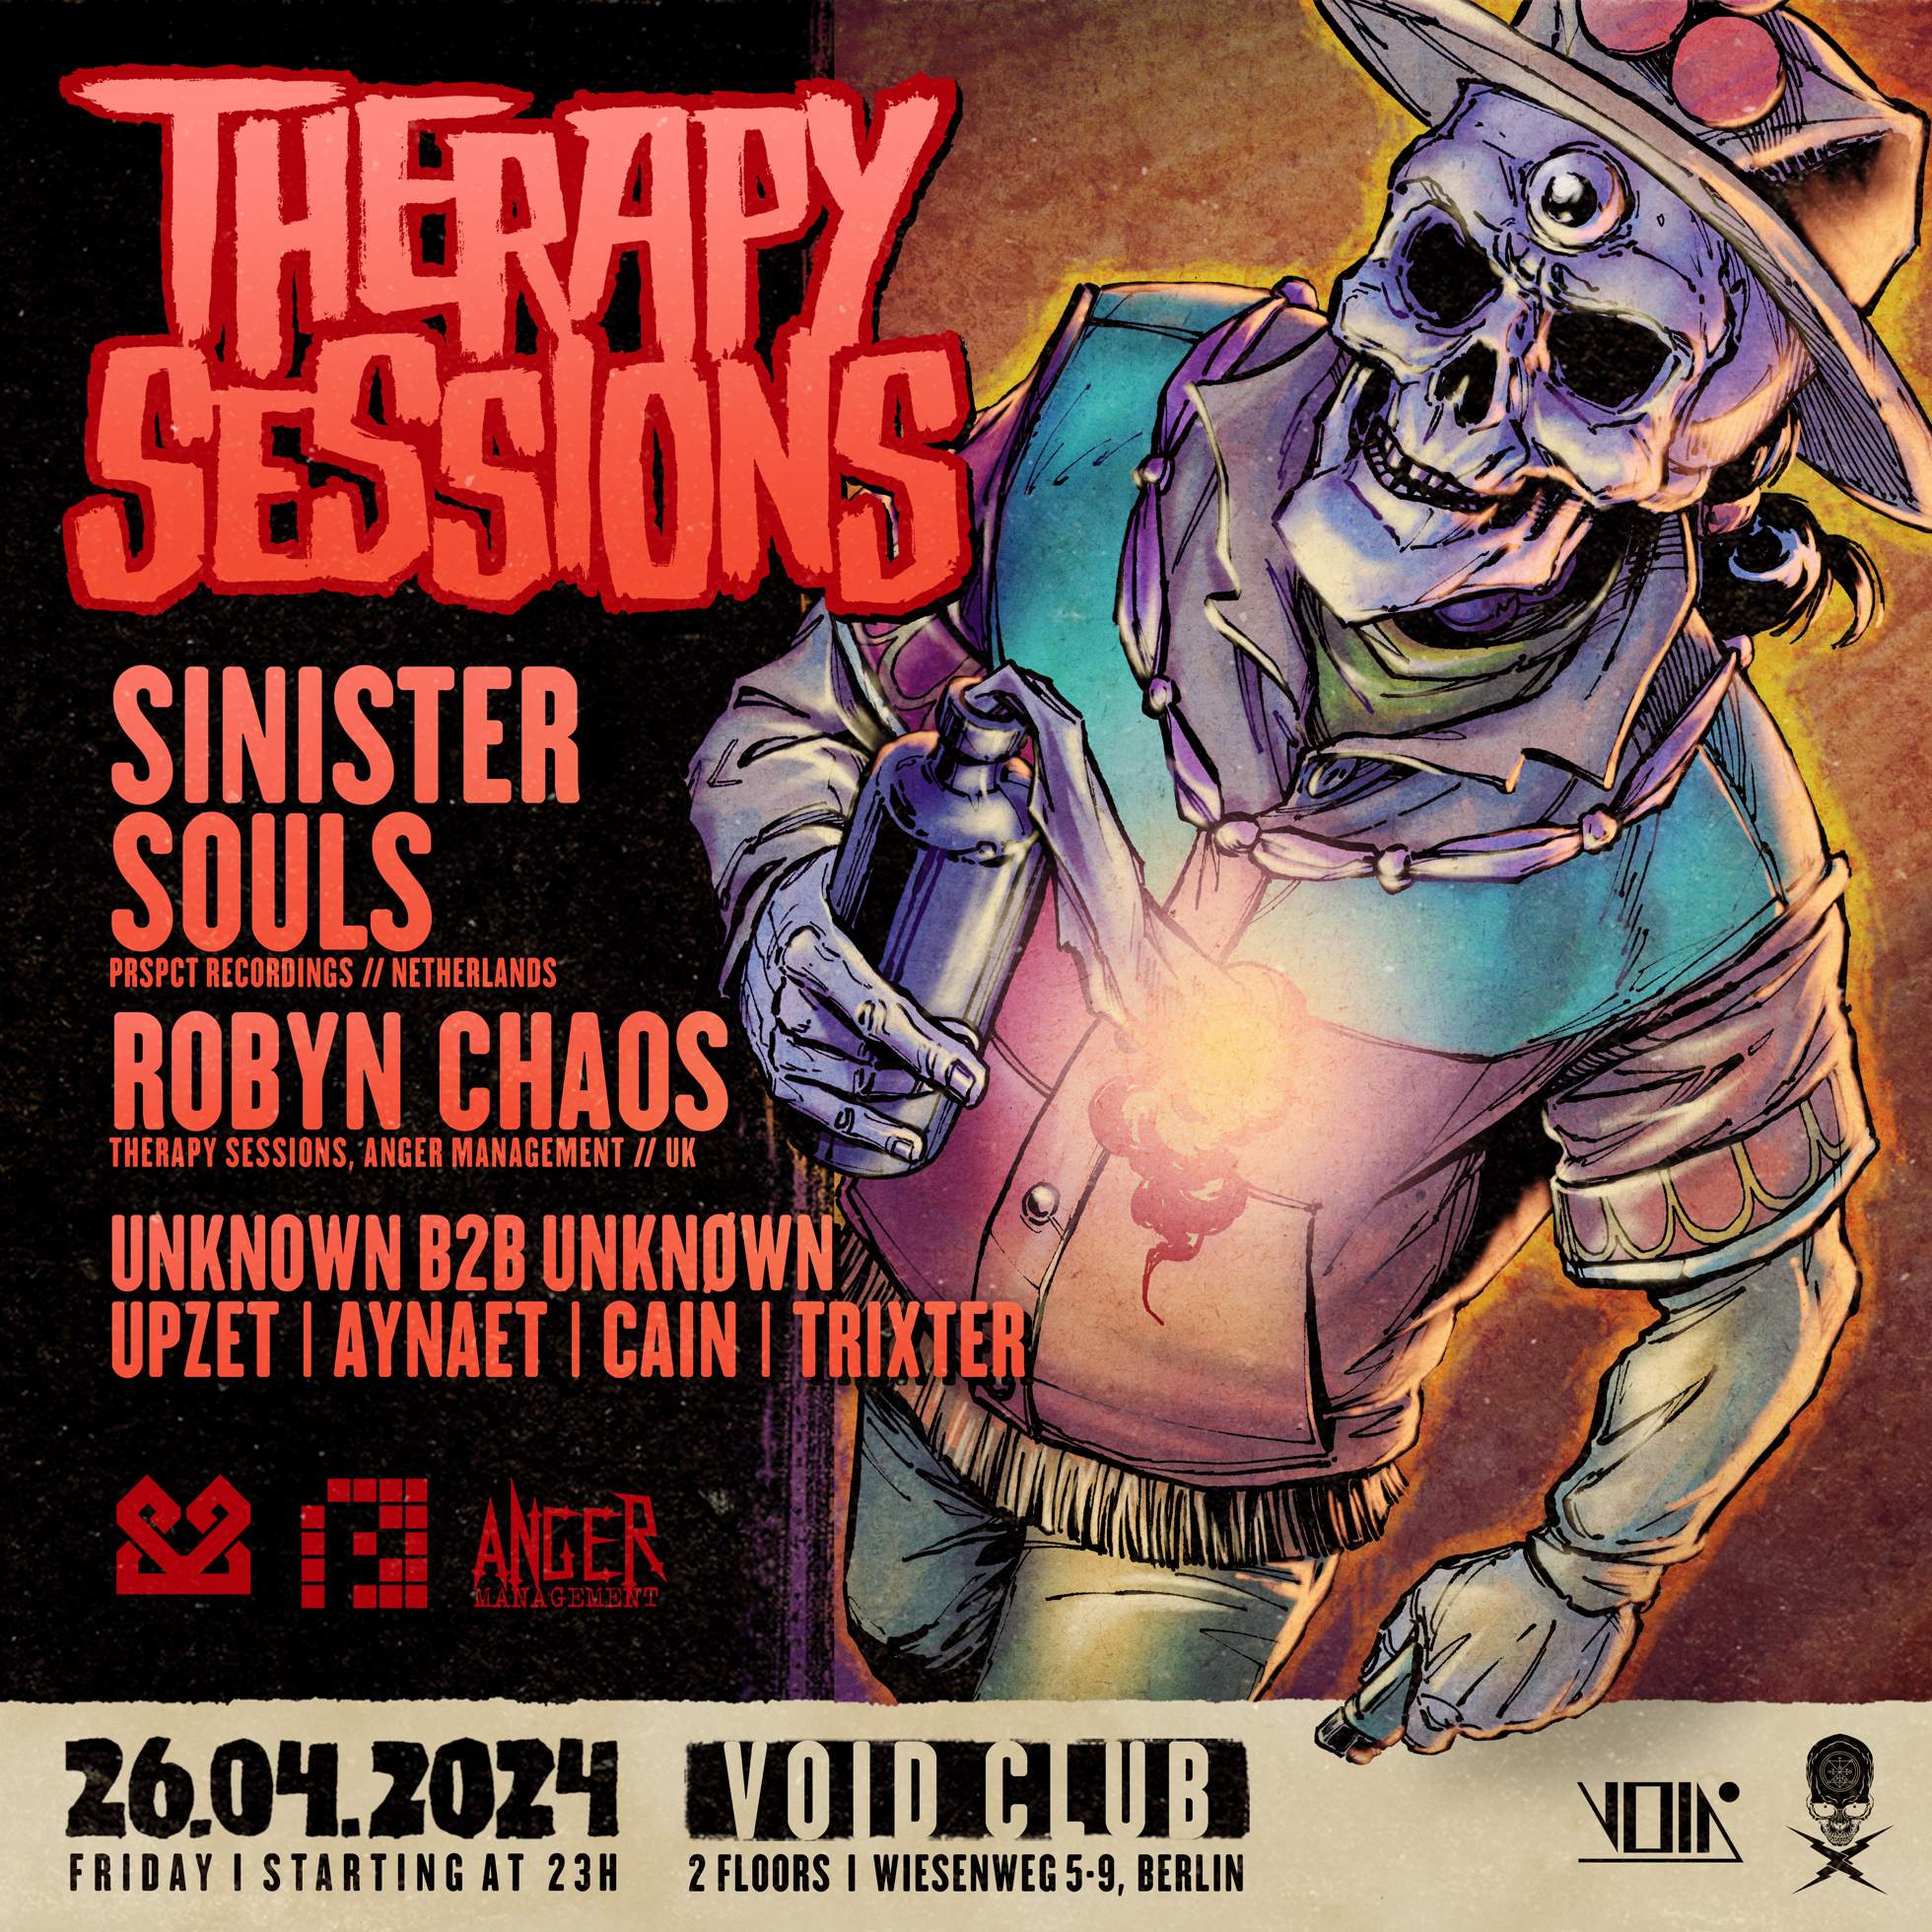 Therapy Sessions XIV with Sinister Souls, Robyn Chaos - フライヤー表